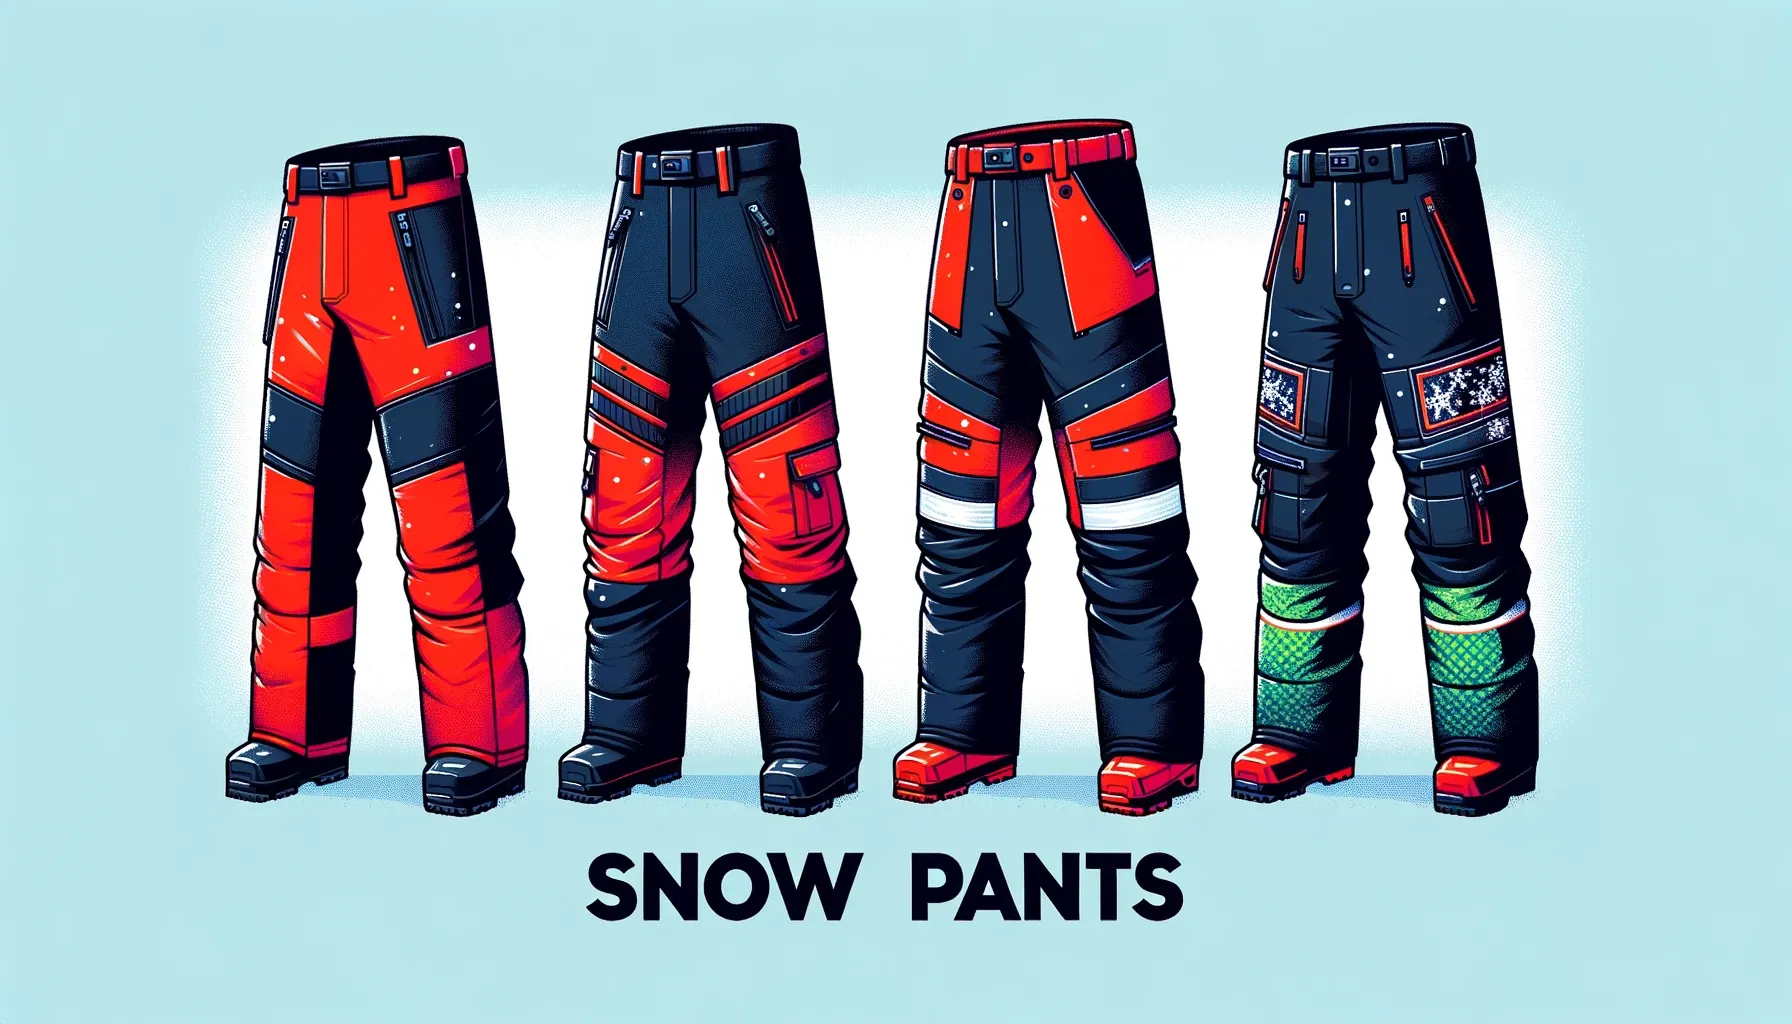 Surviving Extreme Cold: Why Snow Pants Should Be Your Winter Companion